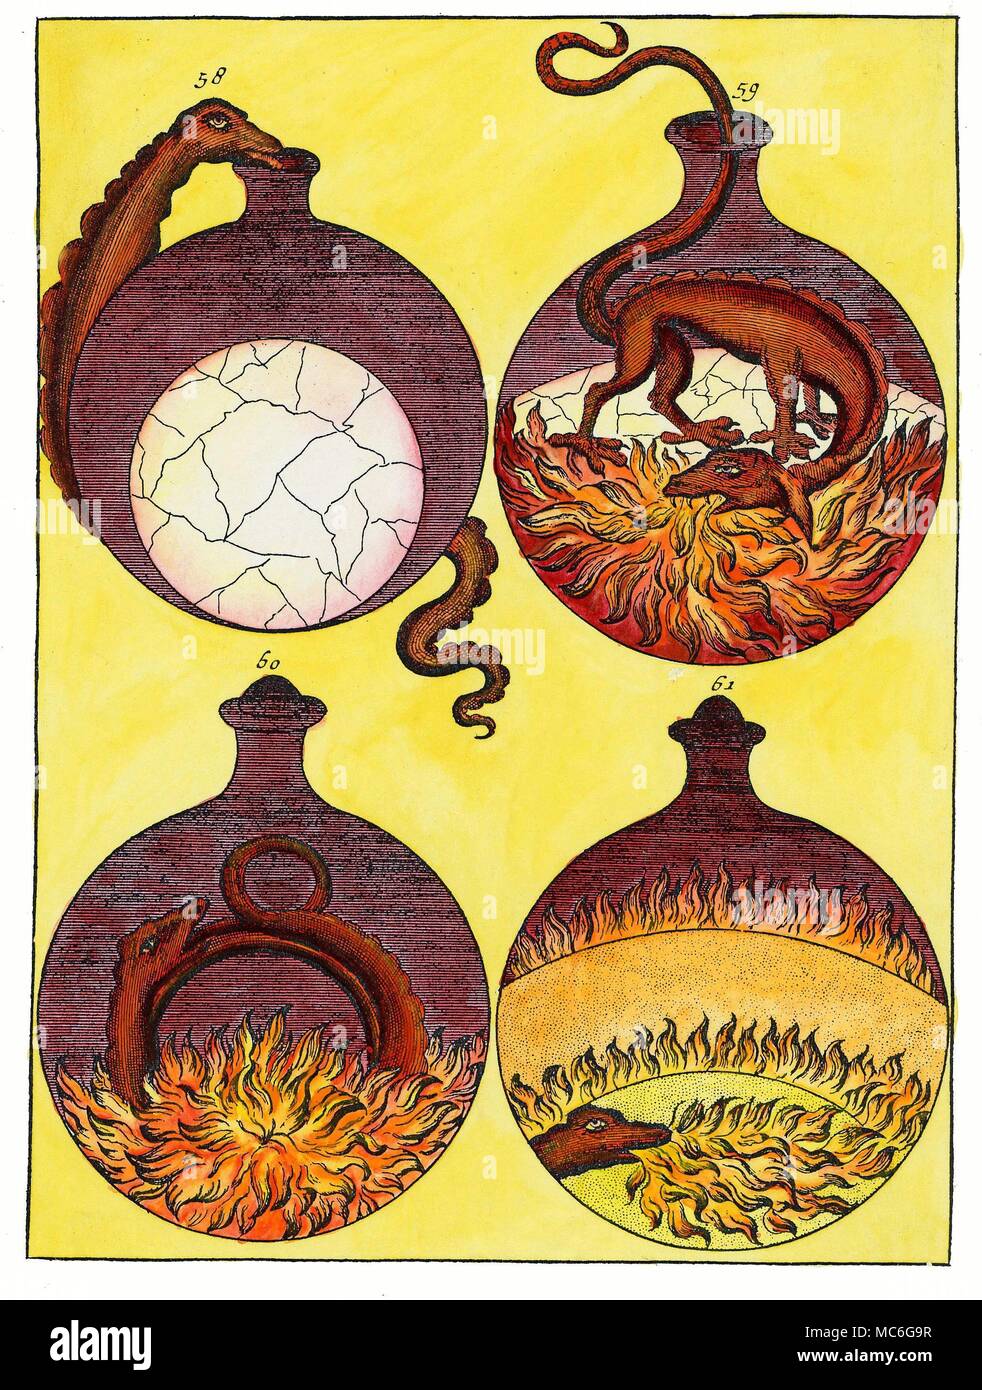 ALCHEMY - SALAMANDER - FIRE ELEMENTAL An alchemical process, represented as taking place in four stages in a single glass vessel. The elemental of Fire (the Salamander) is depicted as playing an important role in the process. In the second vessel, it is shown eating flames, in the third, it is luxuriating in the flames, and seems to have been transformed into an ouroboros snake. Hand-coloured engraving from Johann Conrad Barchusen, Elementa Chemiae, 1718. Stock Photo